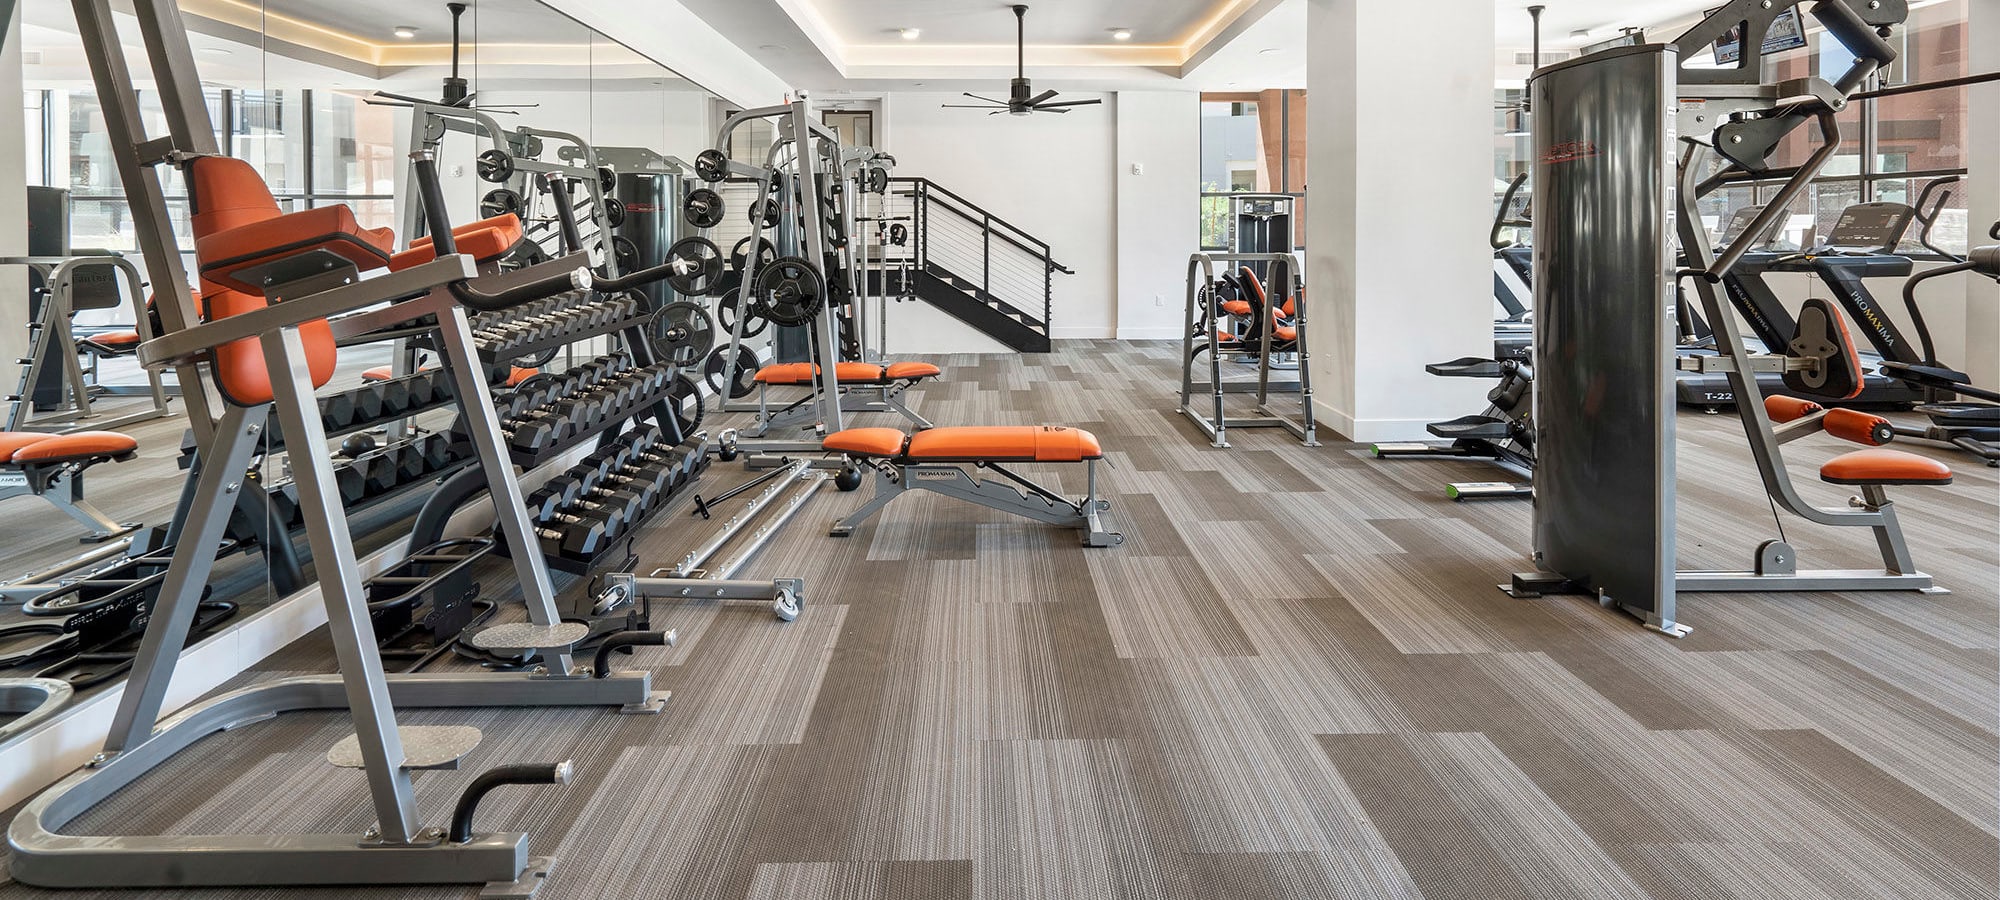 Fitness center at District at Civic Square in Goodyear, Arizona